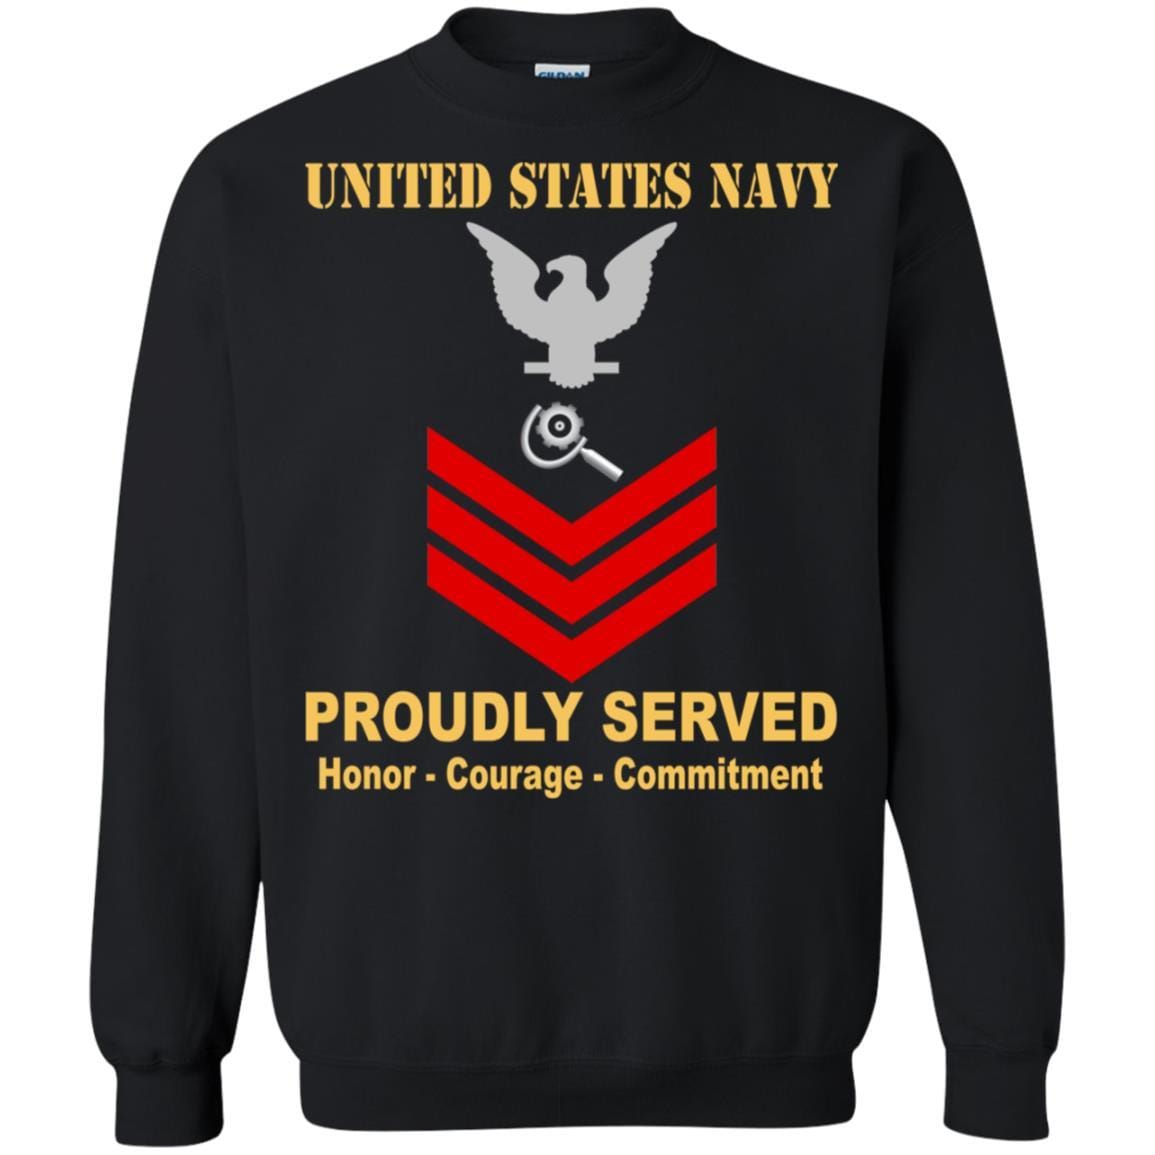 U.S Navy Machinery repairman Navy MR E-6 Rating Badges Proudly Served T-Shirt For Men On Front-TShirt-Navy-Veterans Nation